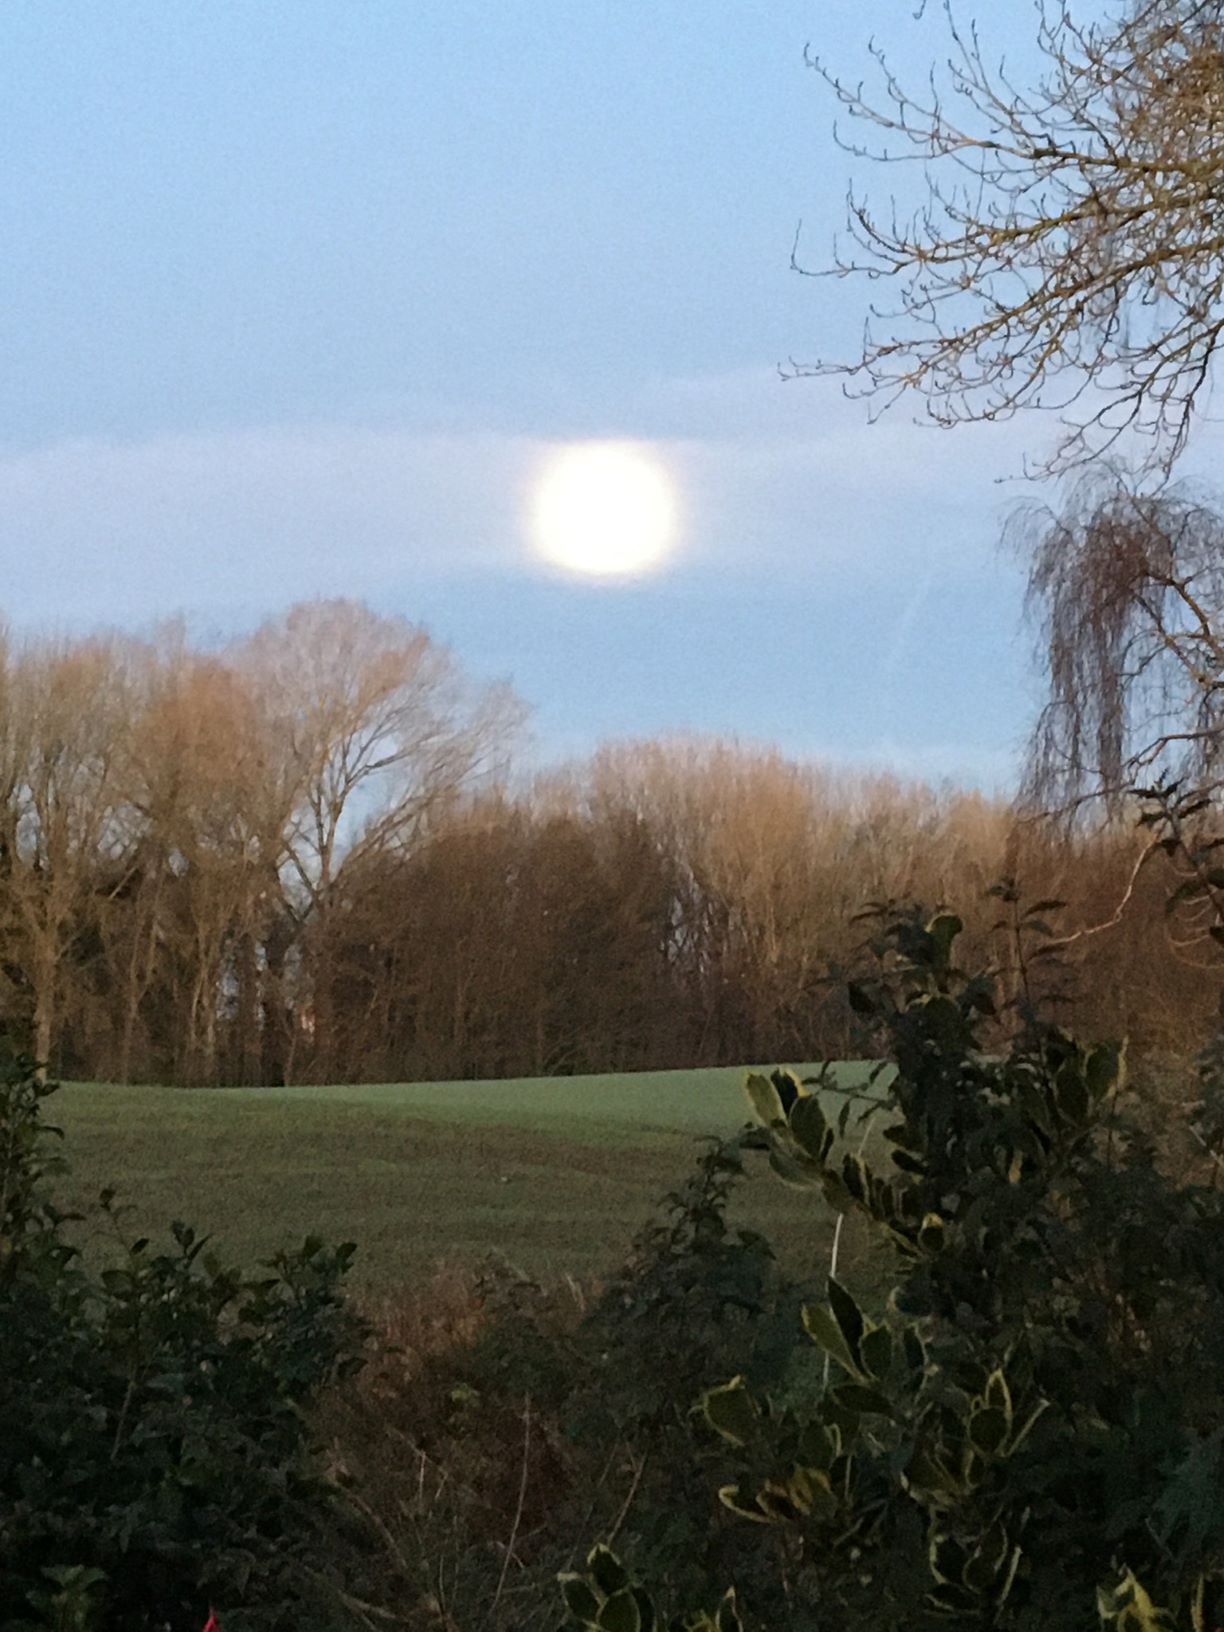 A beaver or frost moon over Rookery Wood, December 1st - photo by Kim J